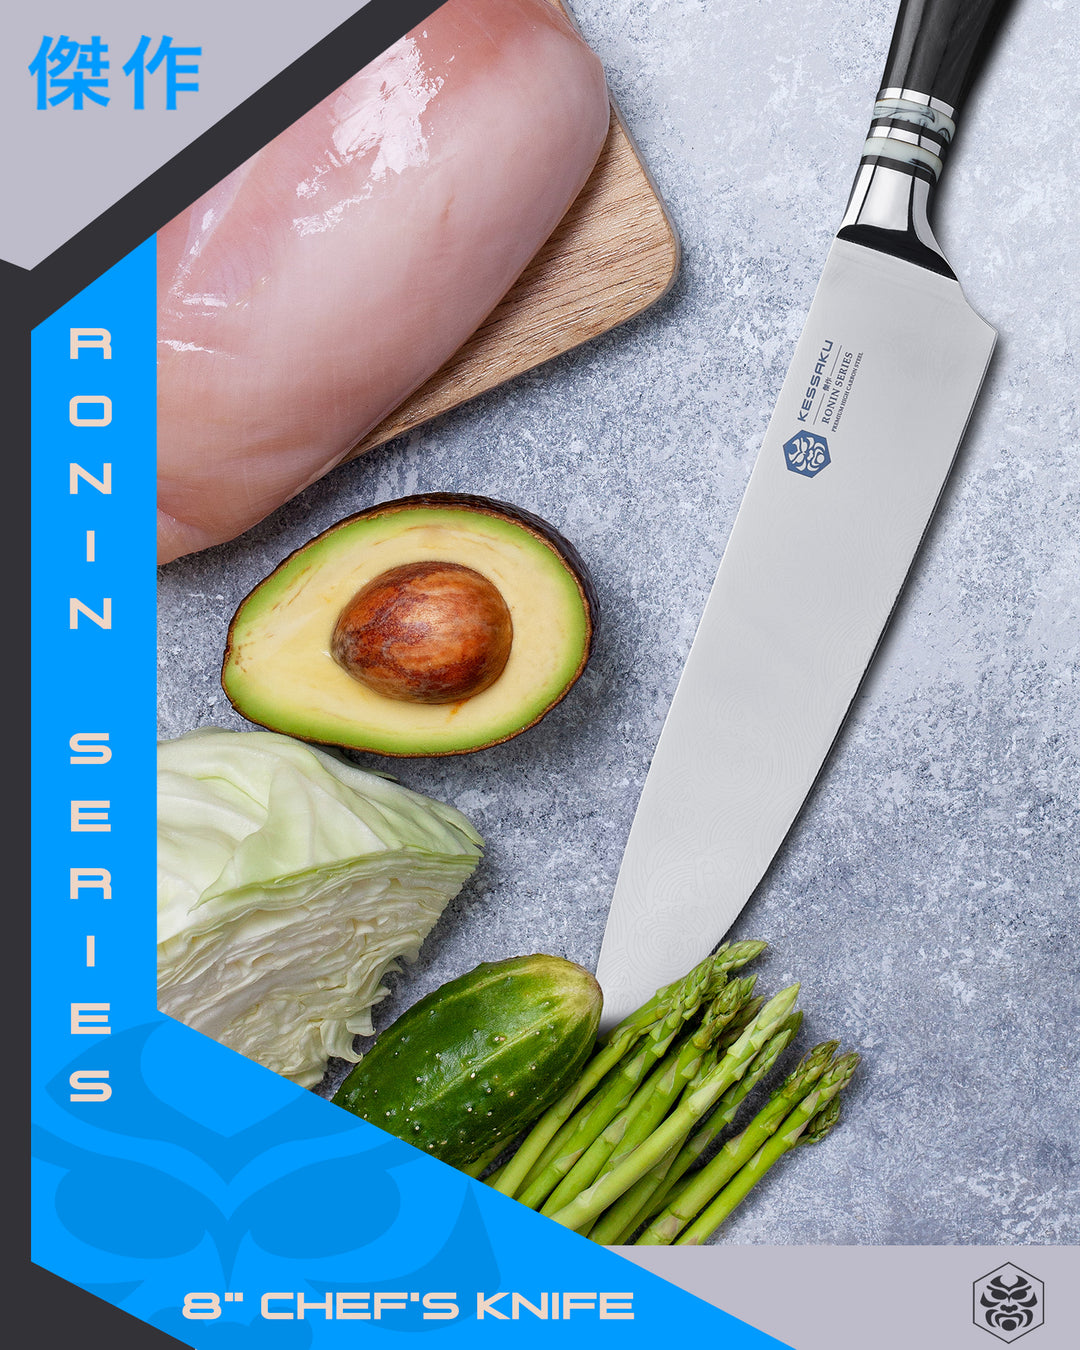 The Ronin Chef's Knife after cutting the fat off a chicken breast, halving an avocado, chopping a head of lettuce in half, and cutting the ends off of asparagus.